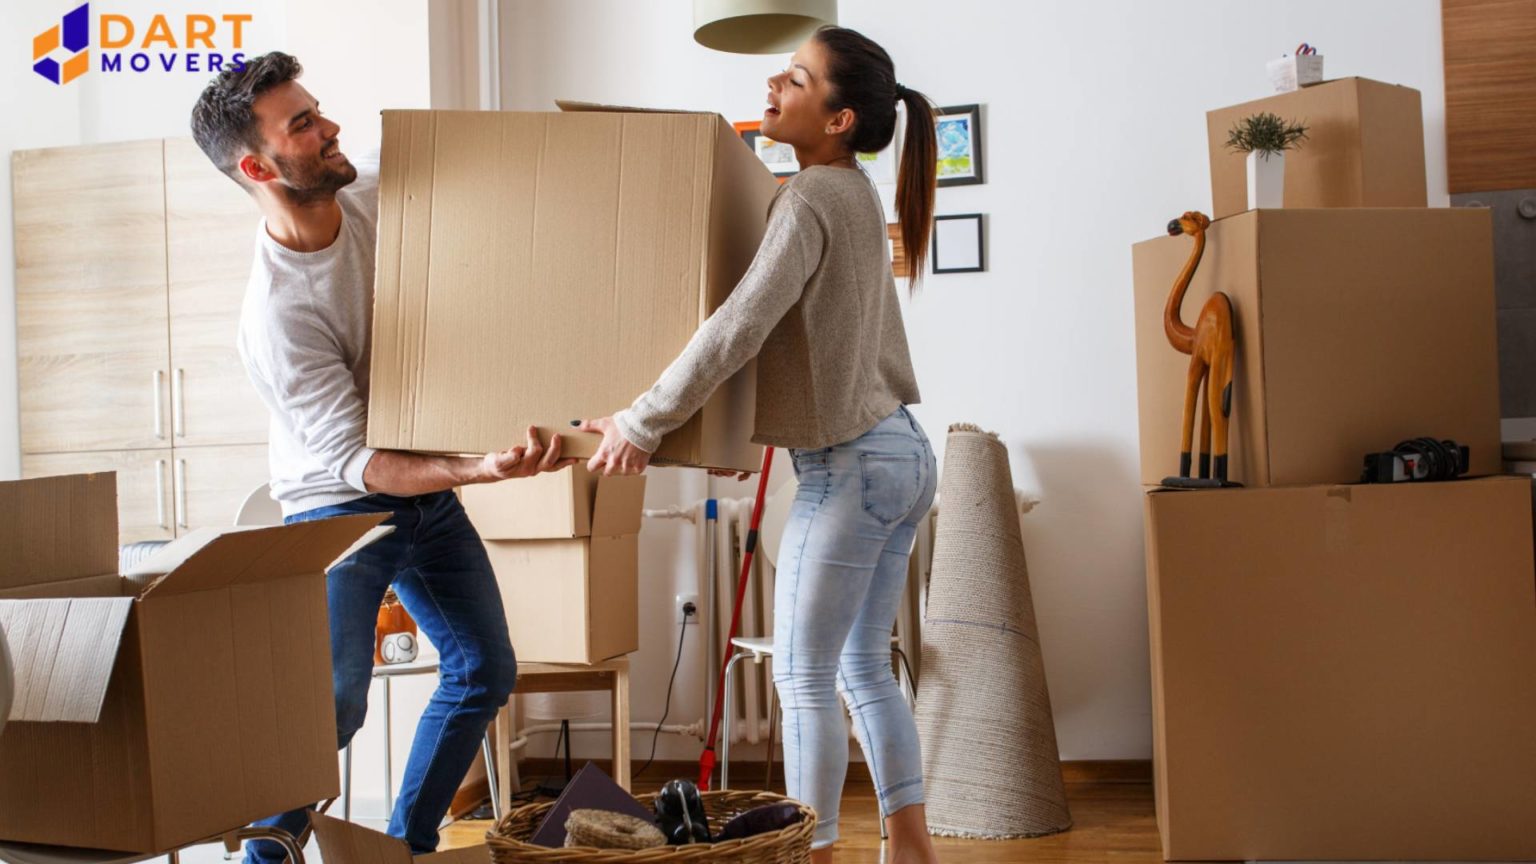 Dubai’s Trusted Local Movers: Your Moving Partner